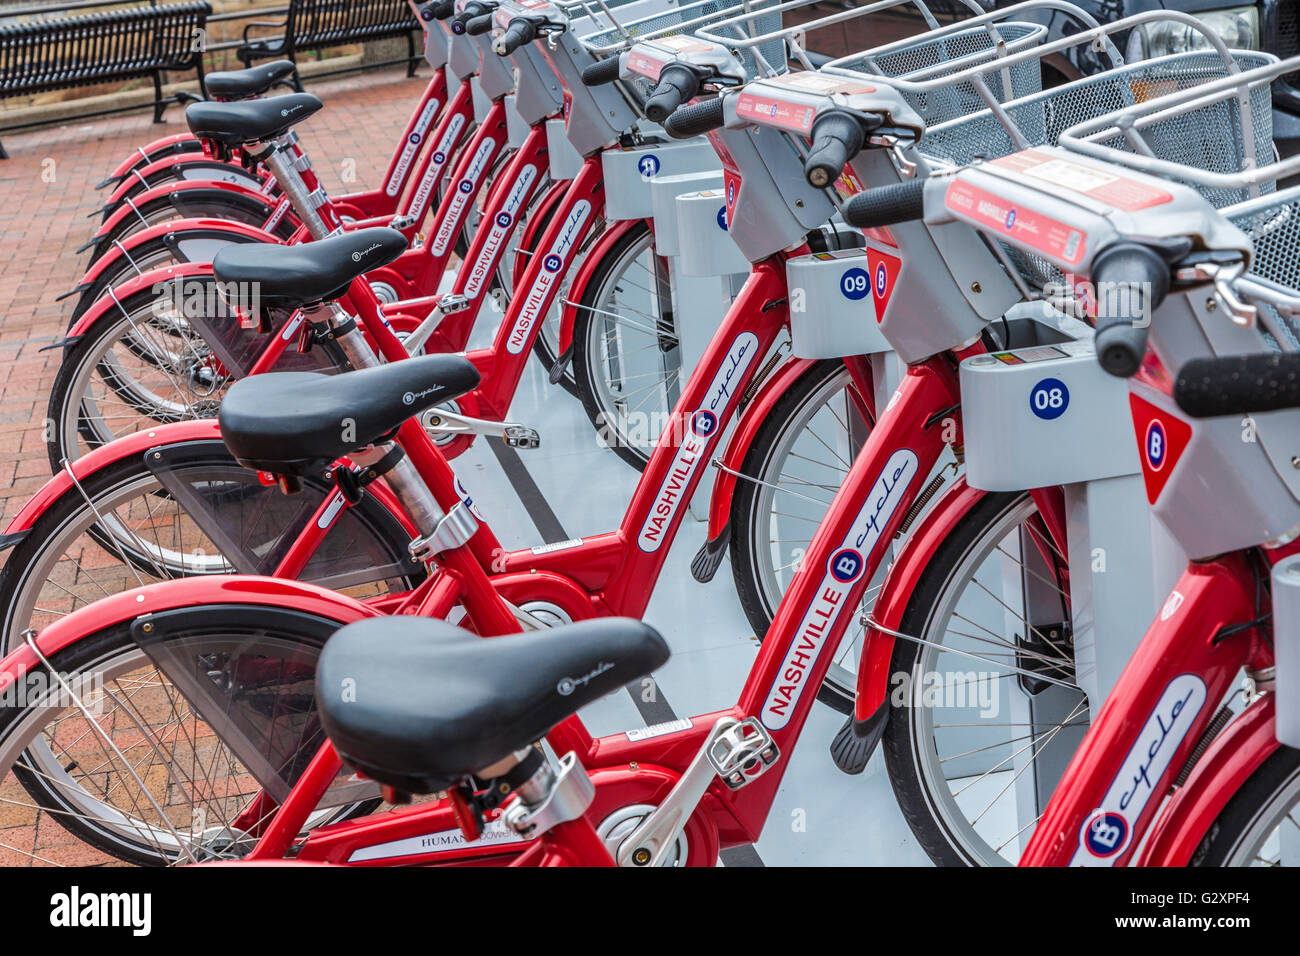 Rental bicycles in rack at a Nashville B Cycle rental station in downtown Nashville, Tennessee Stock Photo